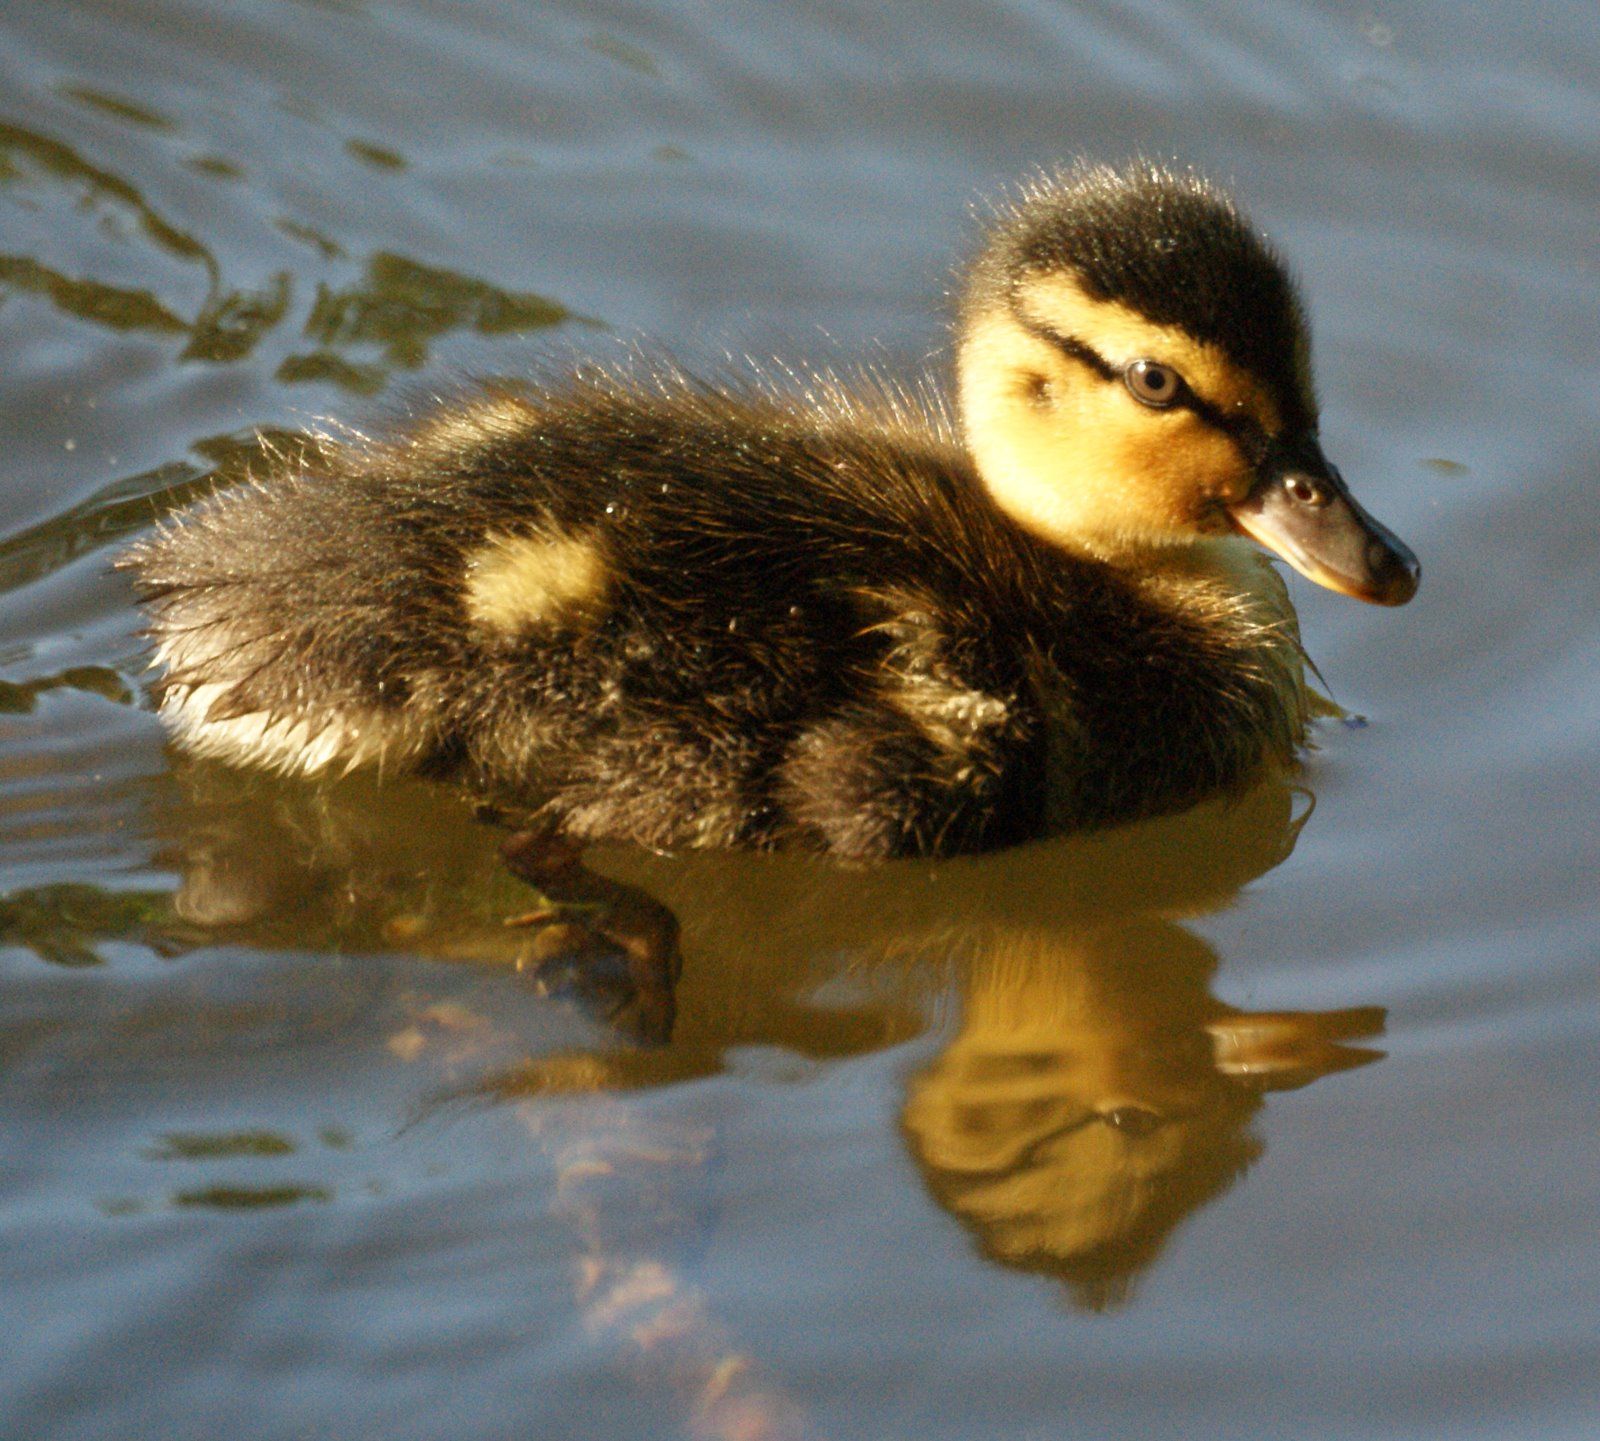 Serious duck is serious. | Baby Ducks | Pinterest | Baby ducks and ...